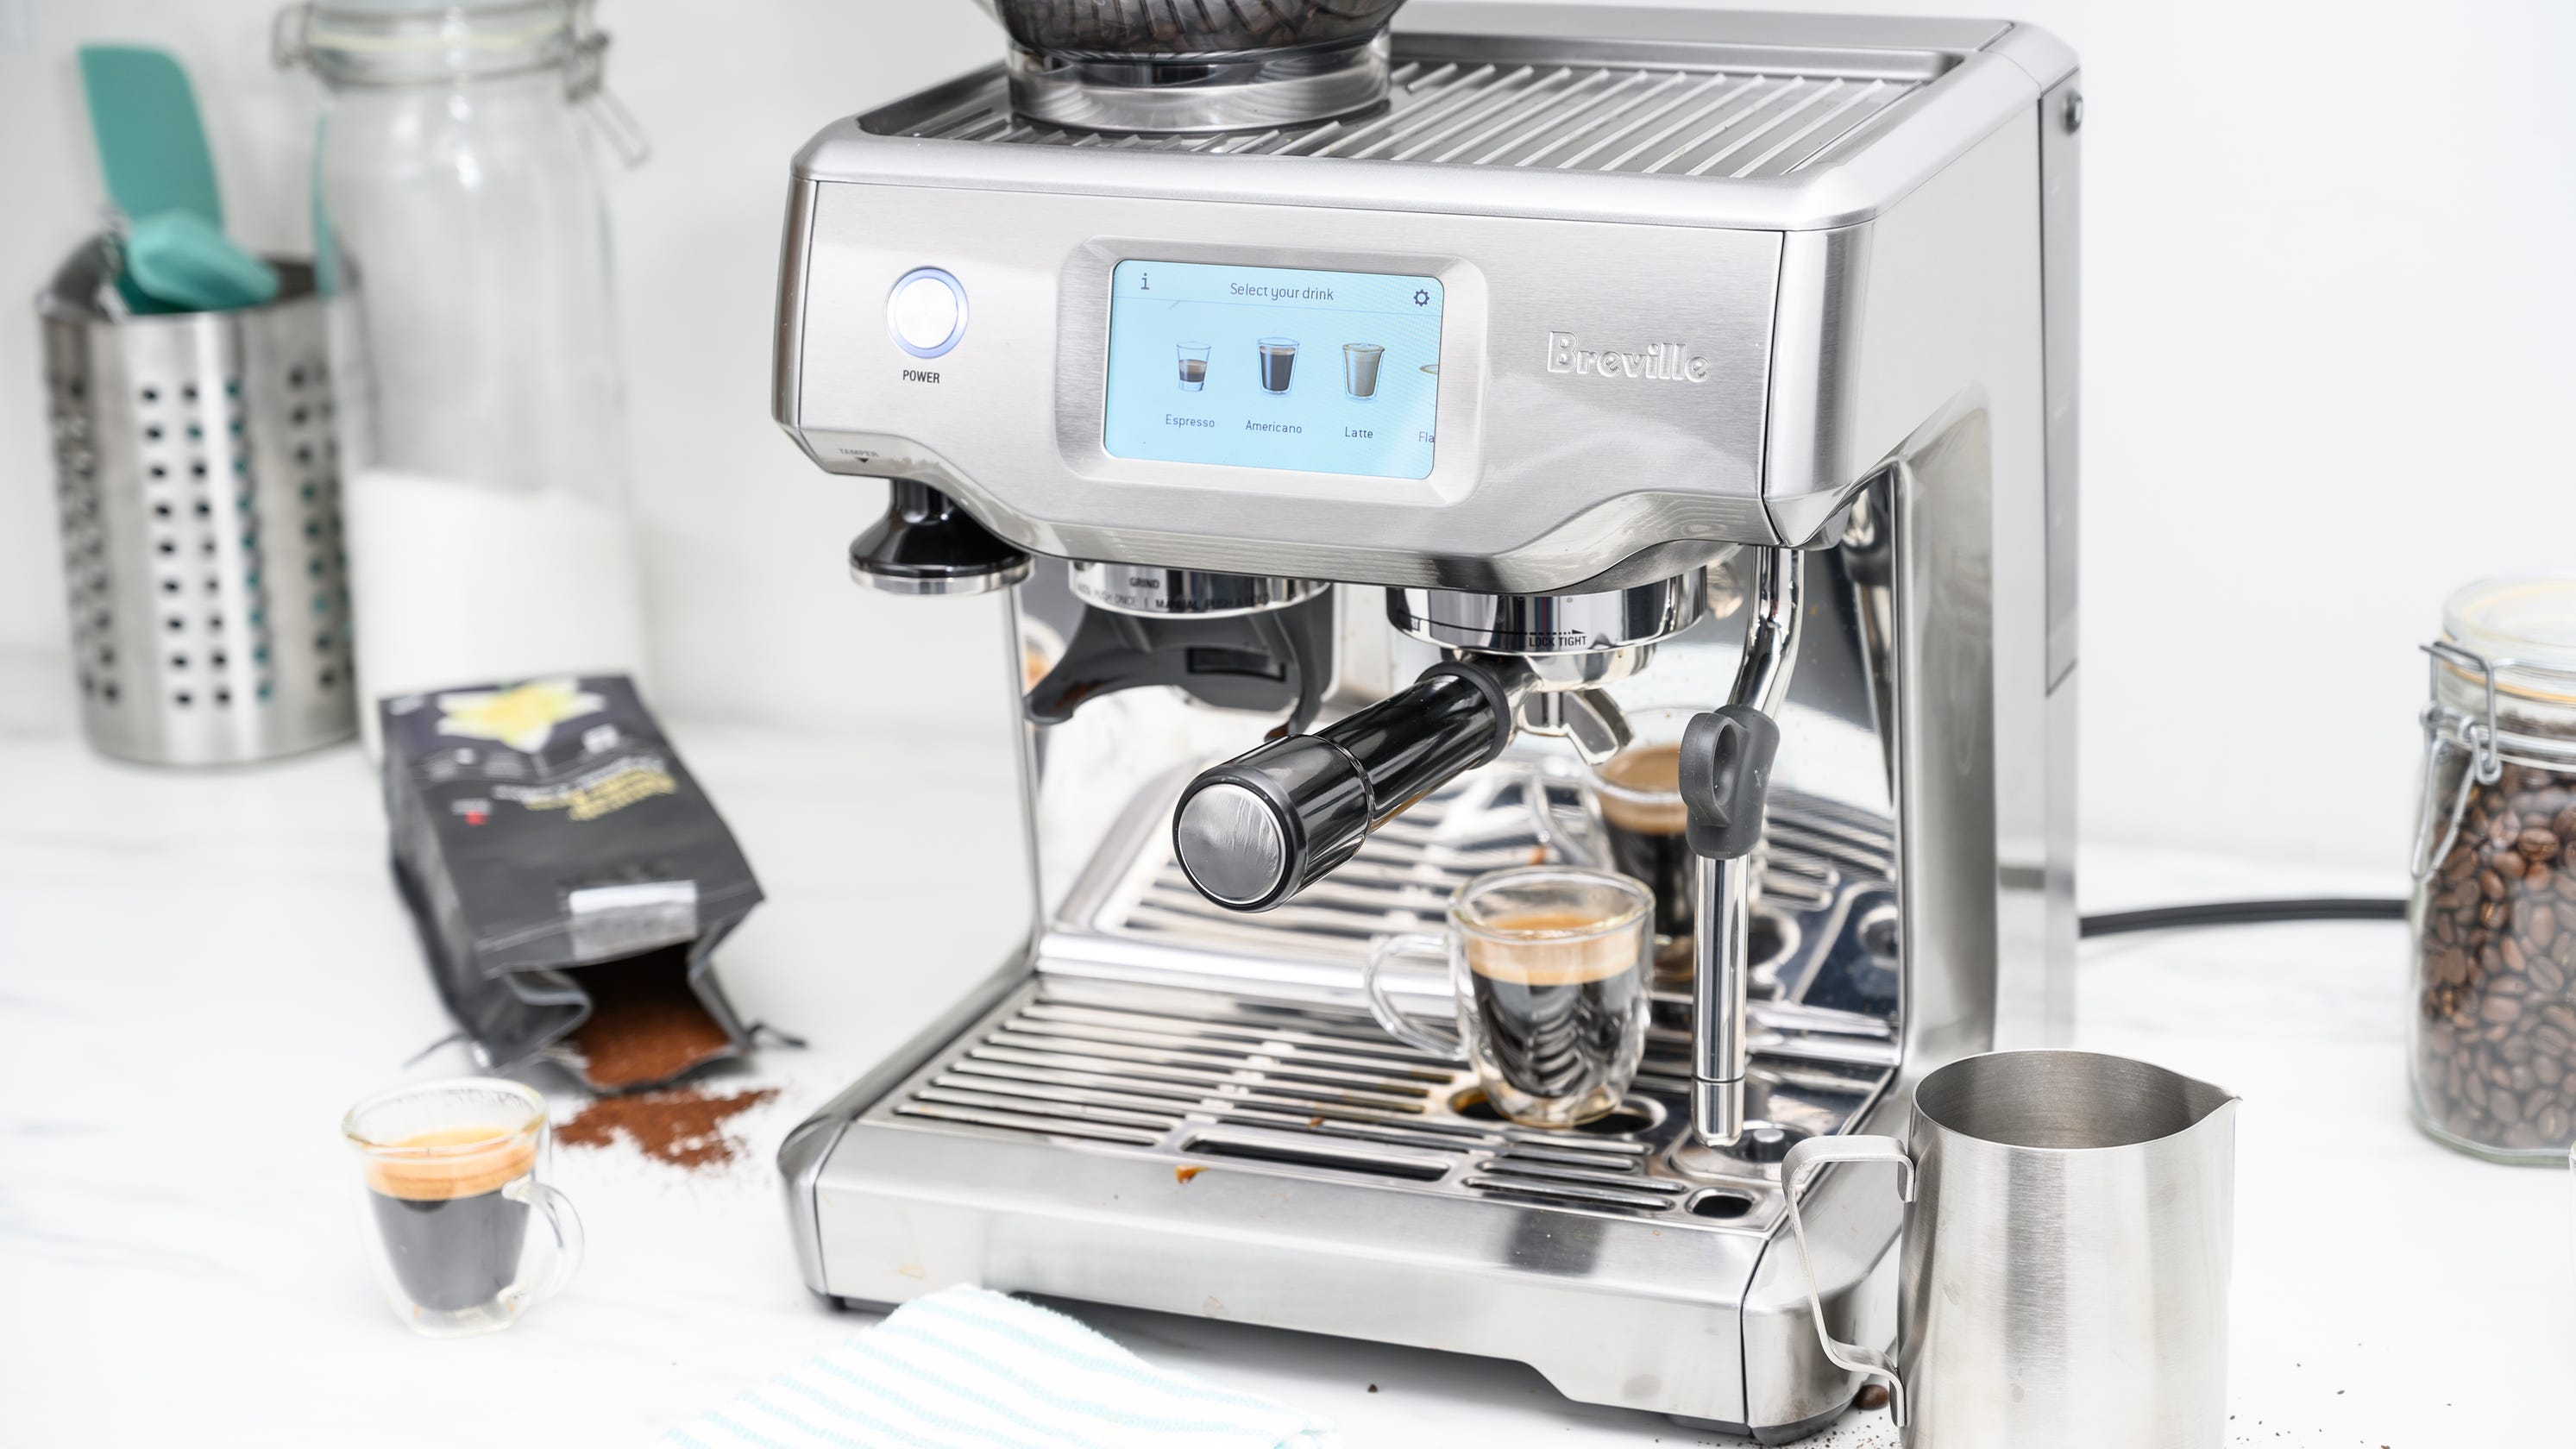 Cyber Week 2019 Get Amazing Deals On Breville Espresso Machines On Wayfair And Amazon,How To Grow Cilantro Indoors